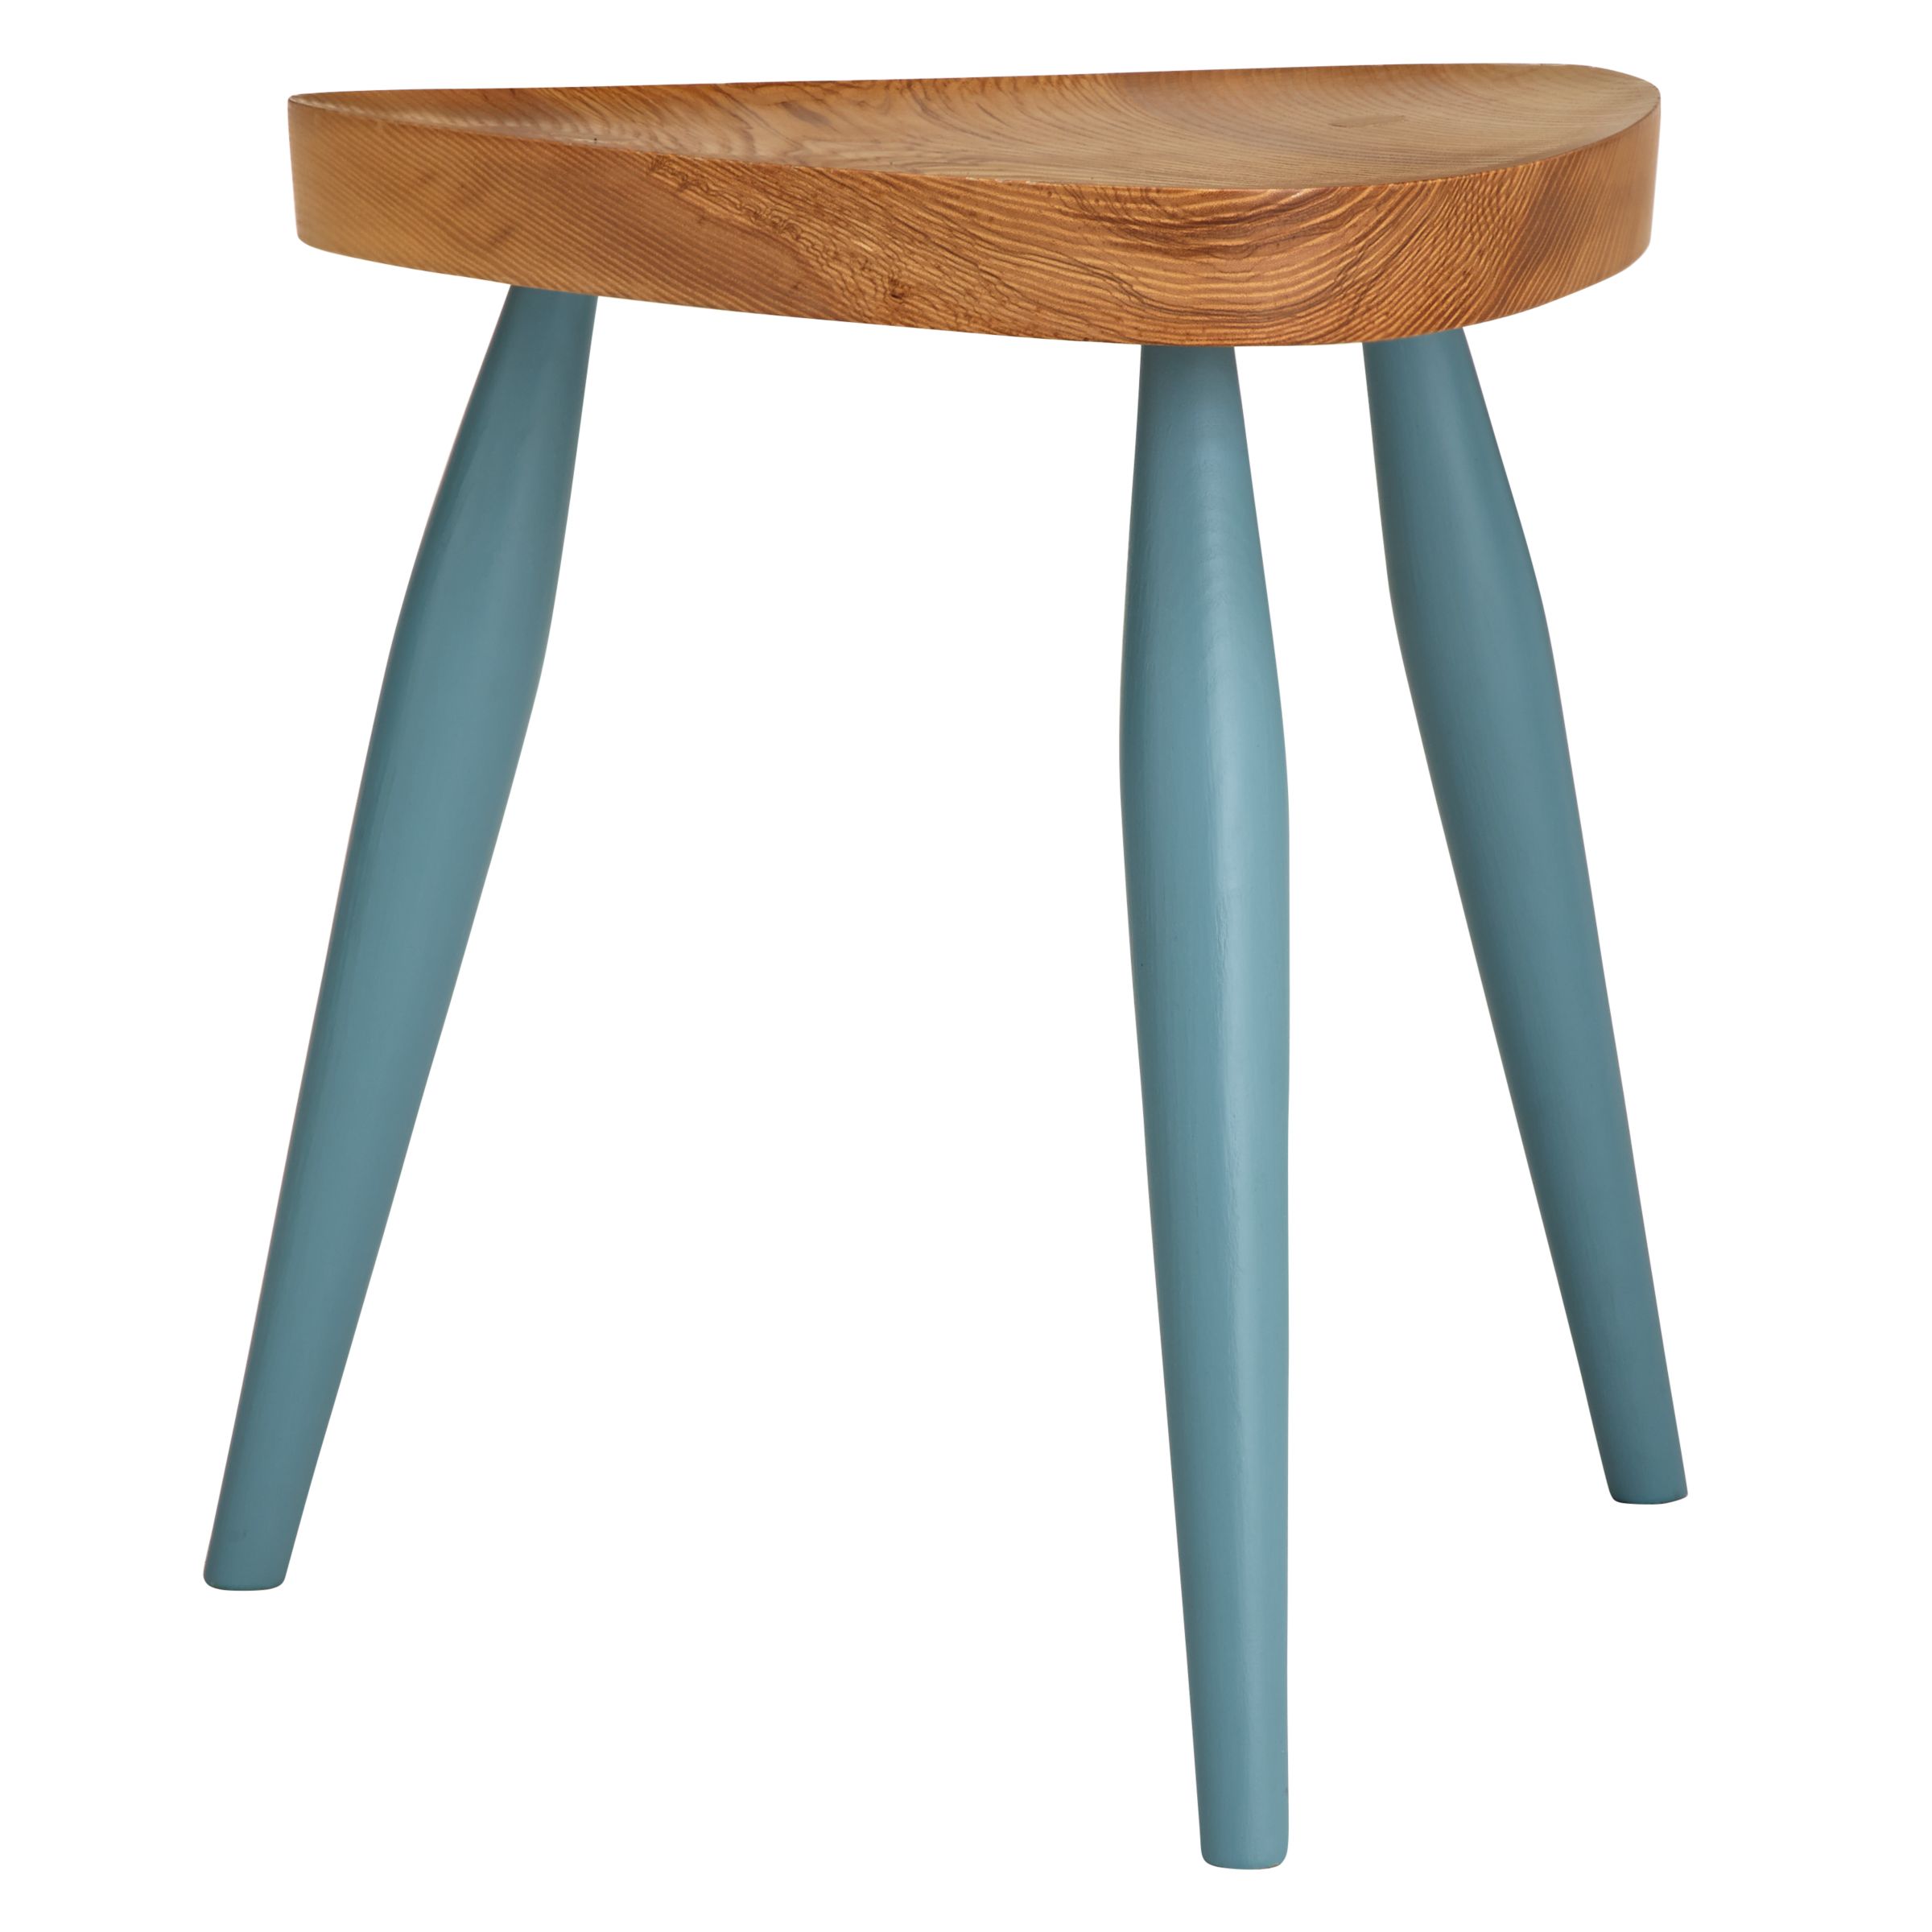 Sitting Firm for Croft Collection Packington side table